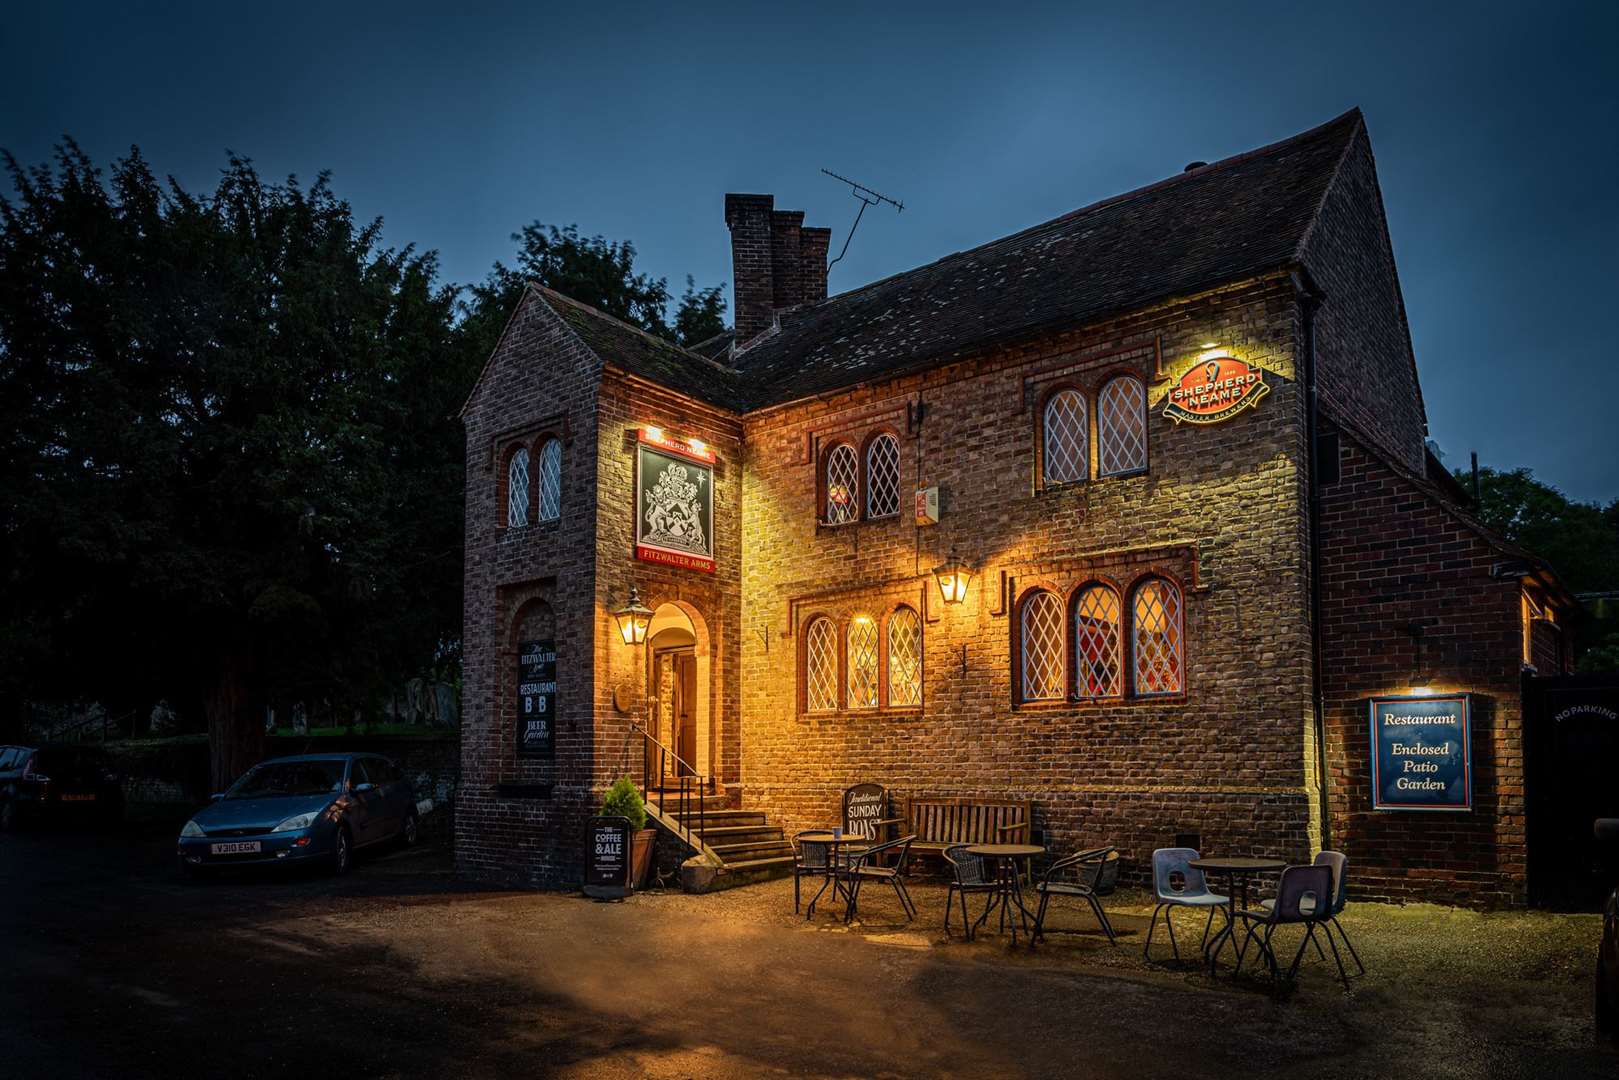 The FitzWalter Arms in Goodnestone. Picture: Frankie Julian